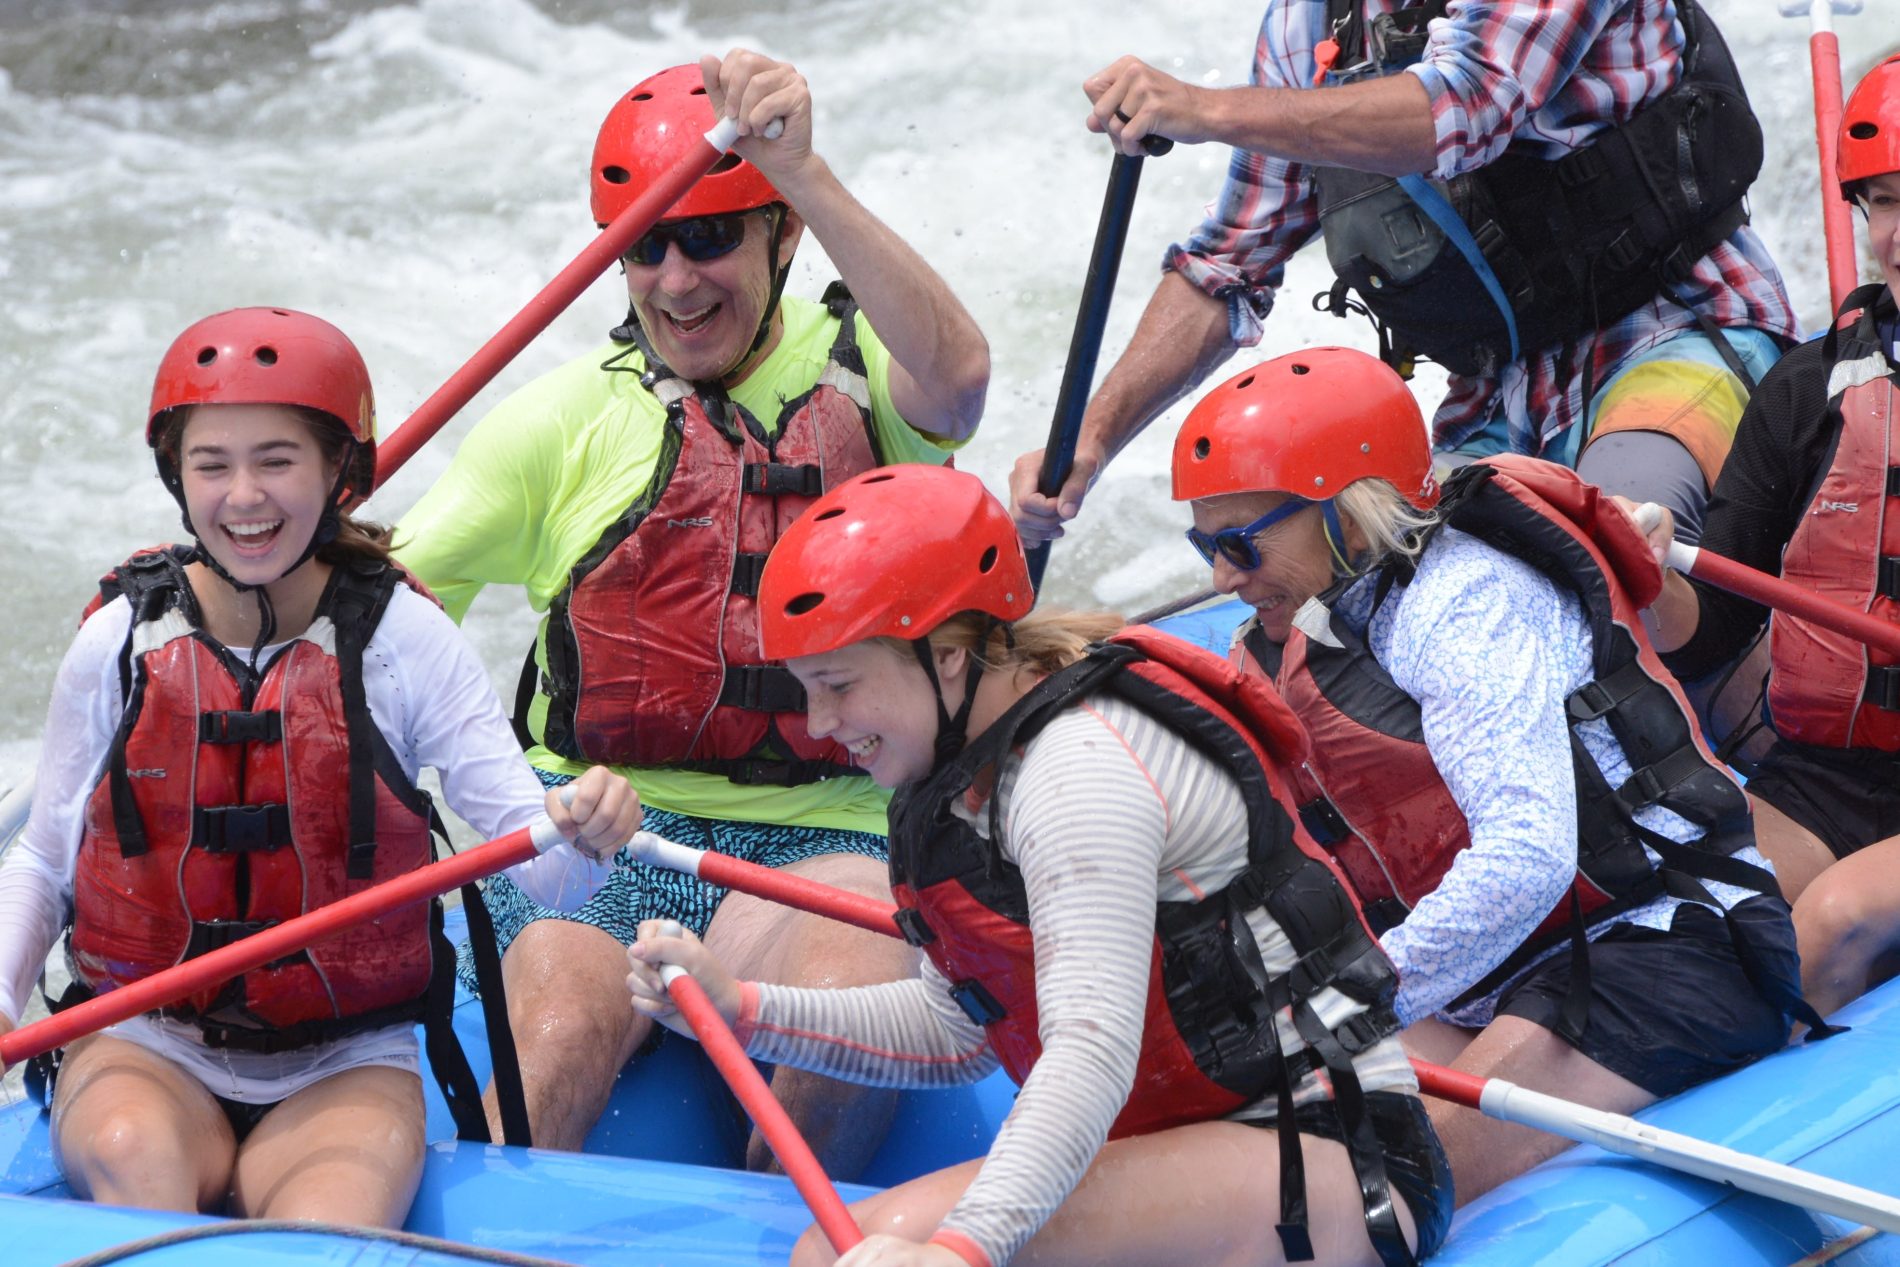 What to Wear for Whitewater Rafting - The Ultimate Guide